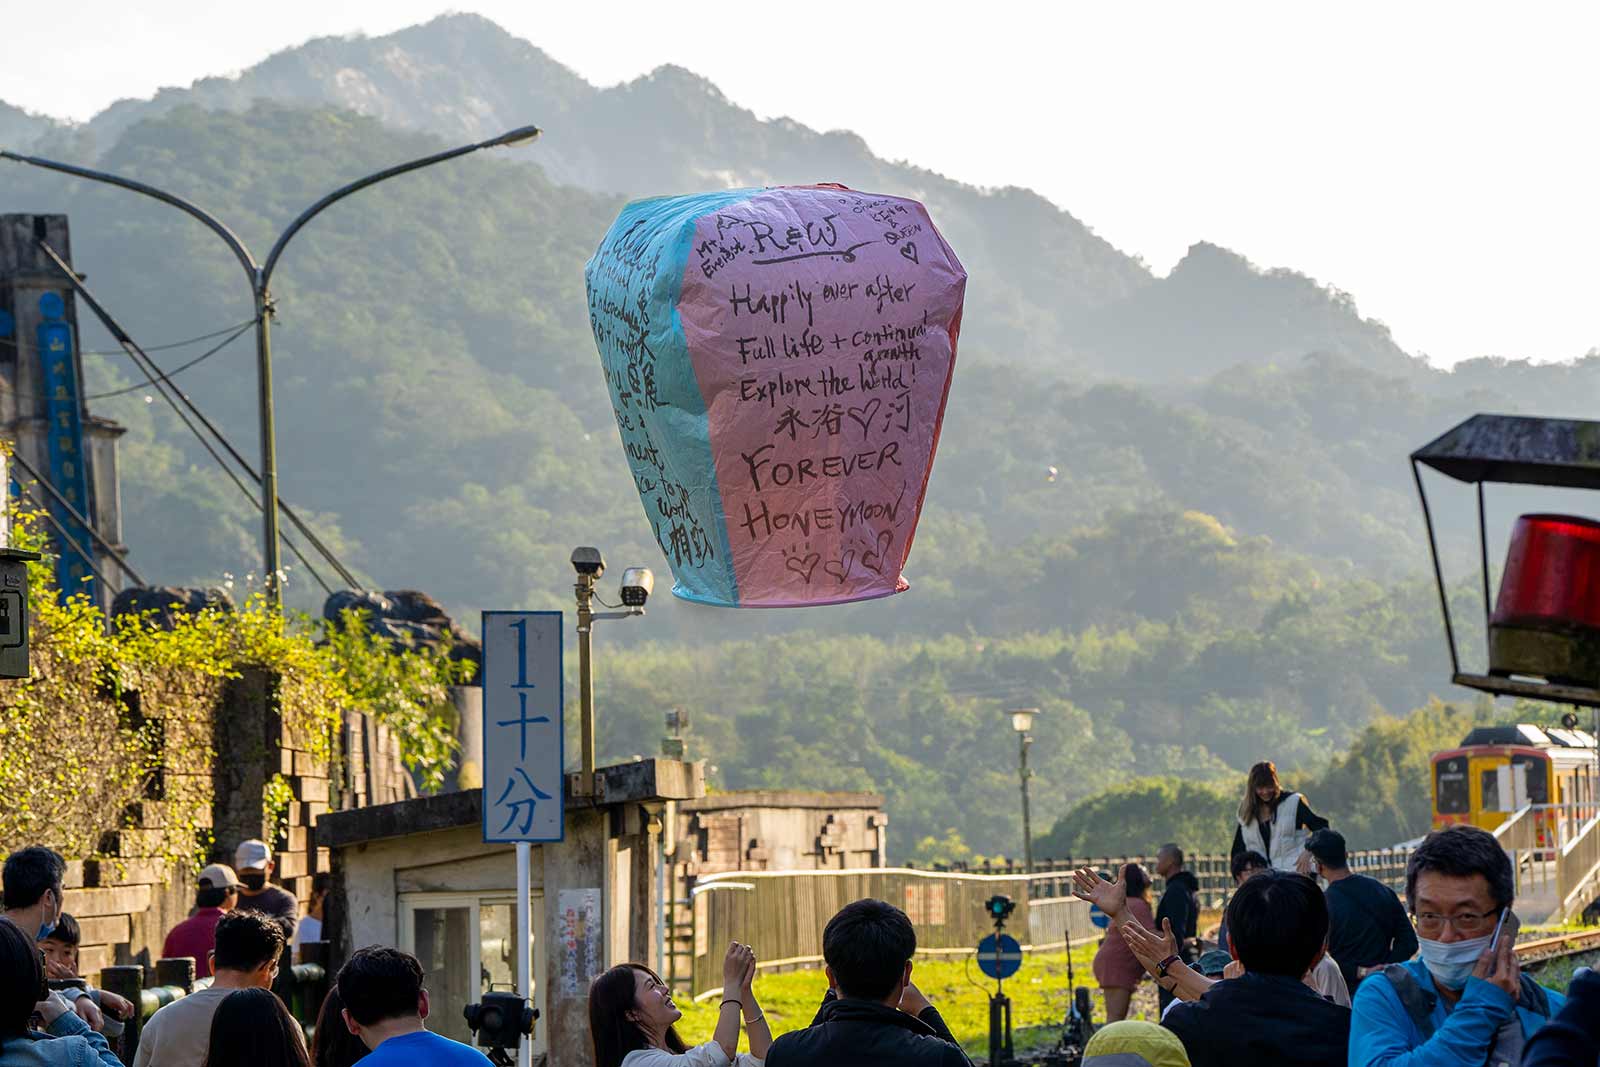 Just launched, a paper sky lantern floats above crowds of tourists in Shifen.